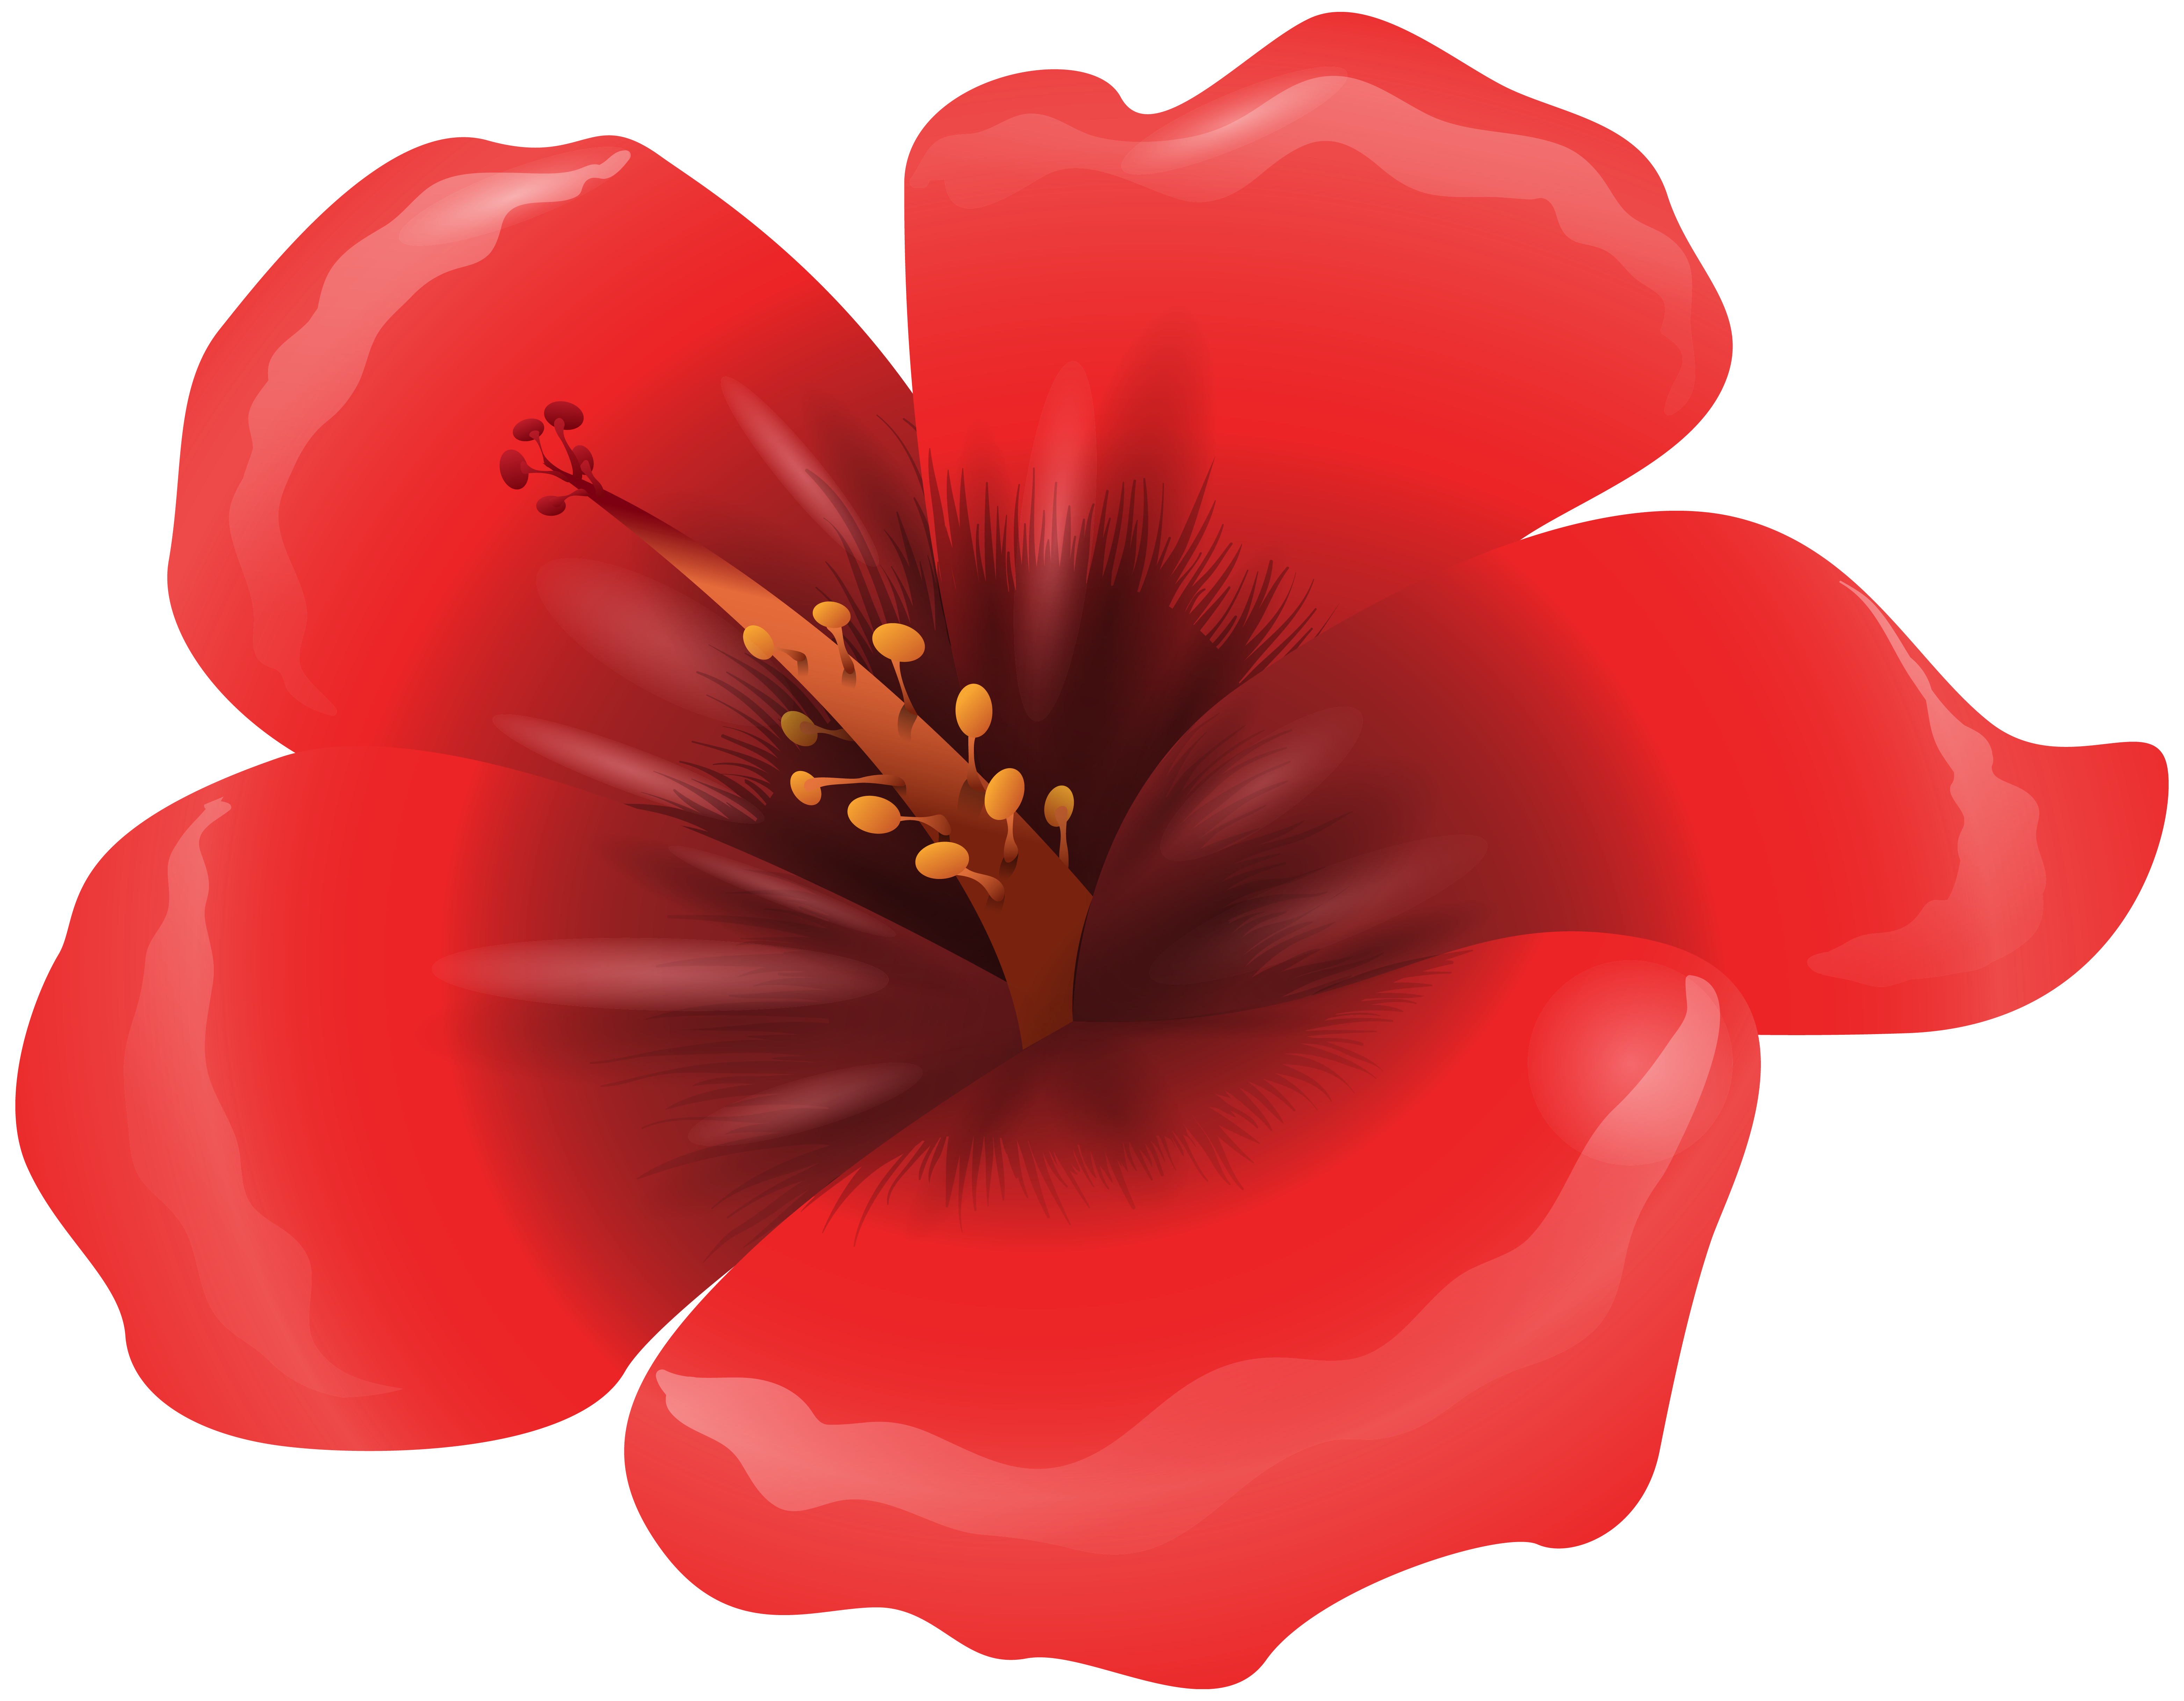 Red Flower clipart #8, Download drawings